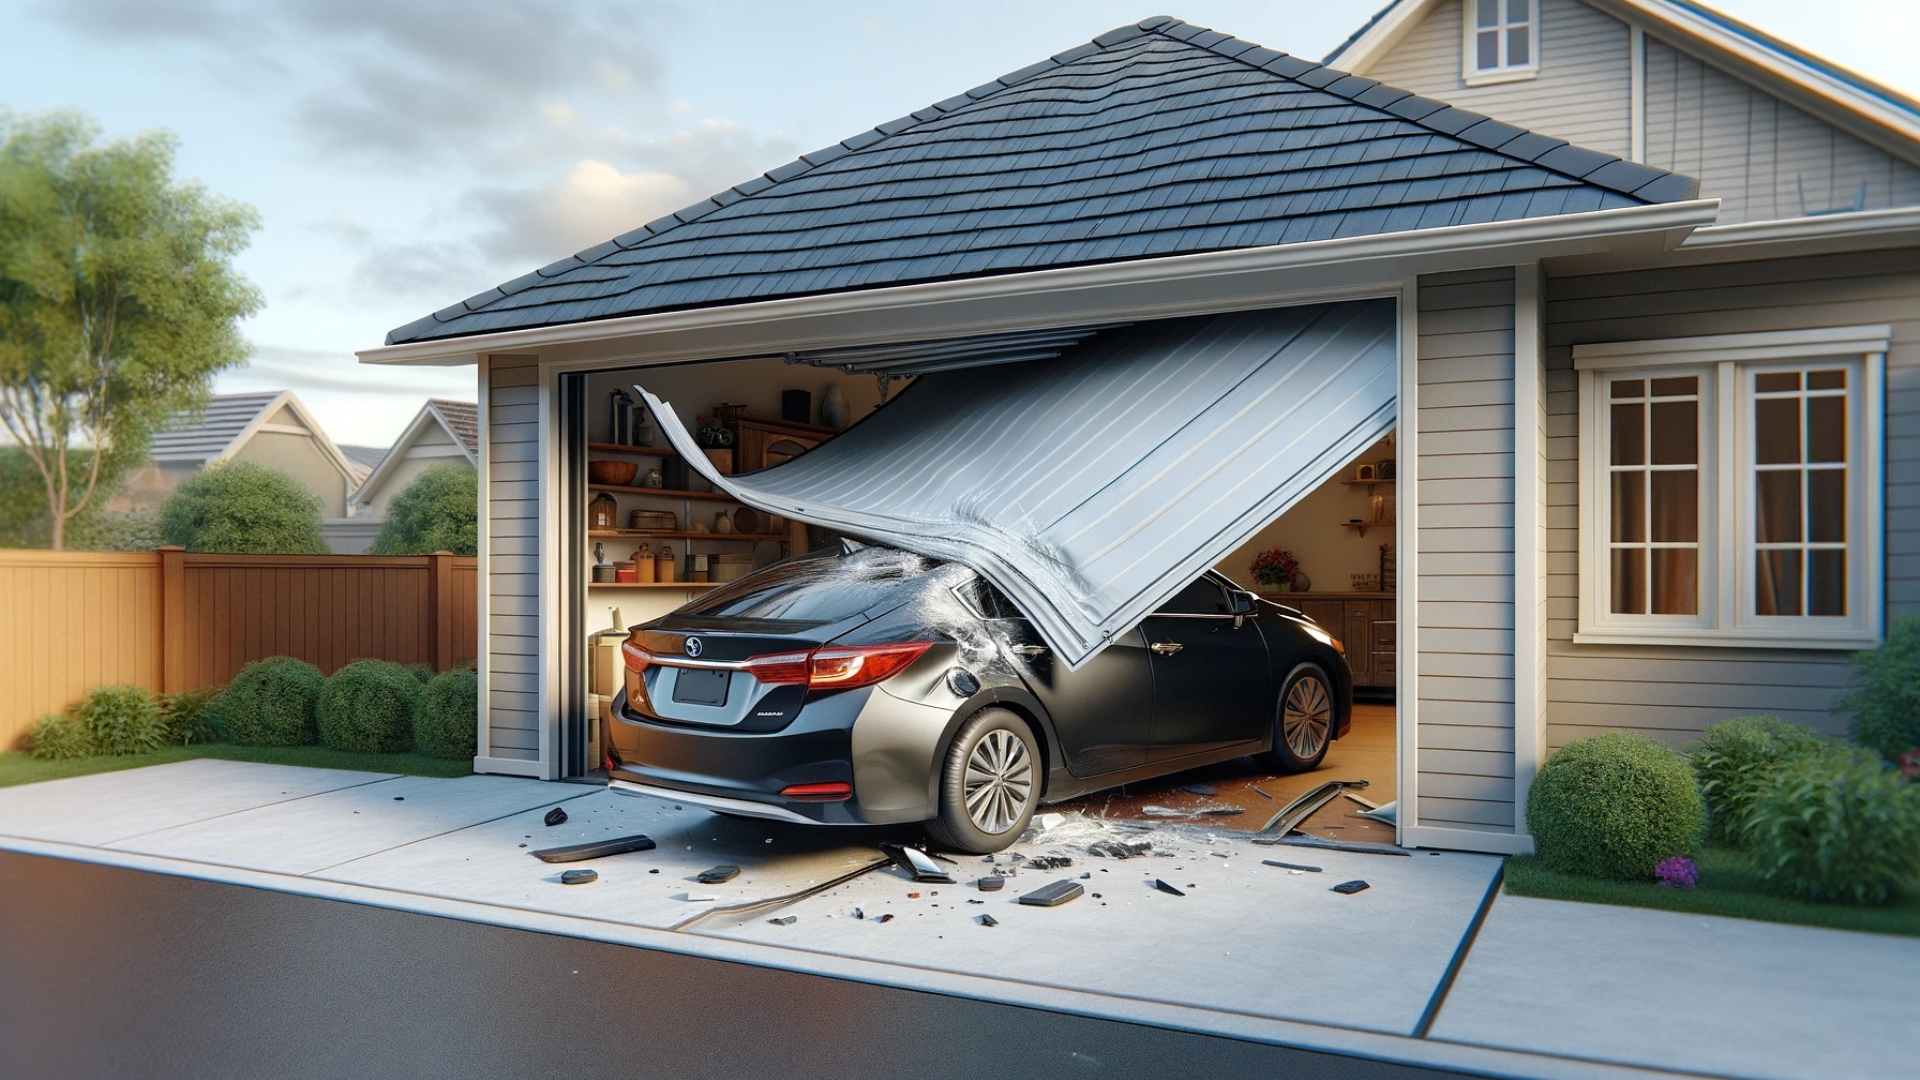 A car hitting the garage door and damaging it